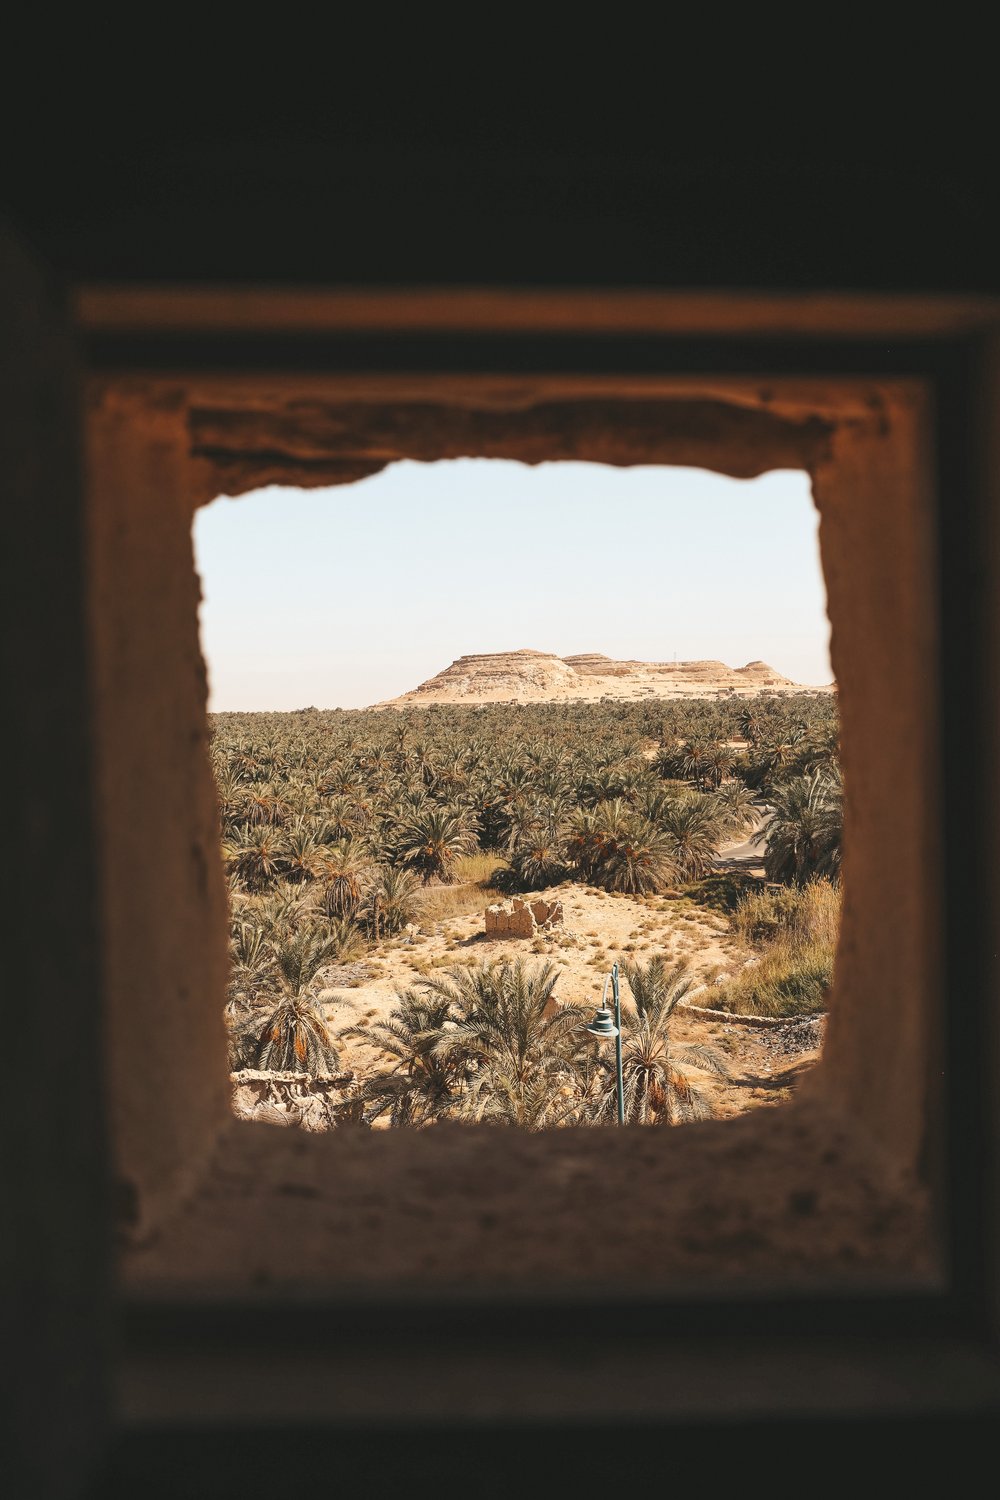 View from the Temple of Amun - Siwa Oasis - Egypt